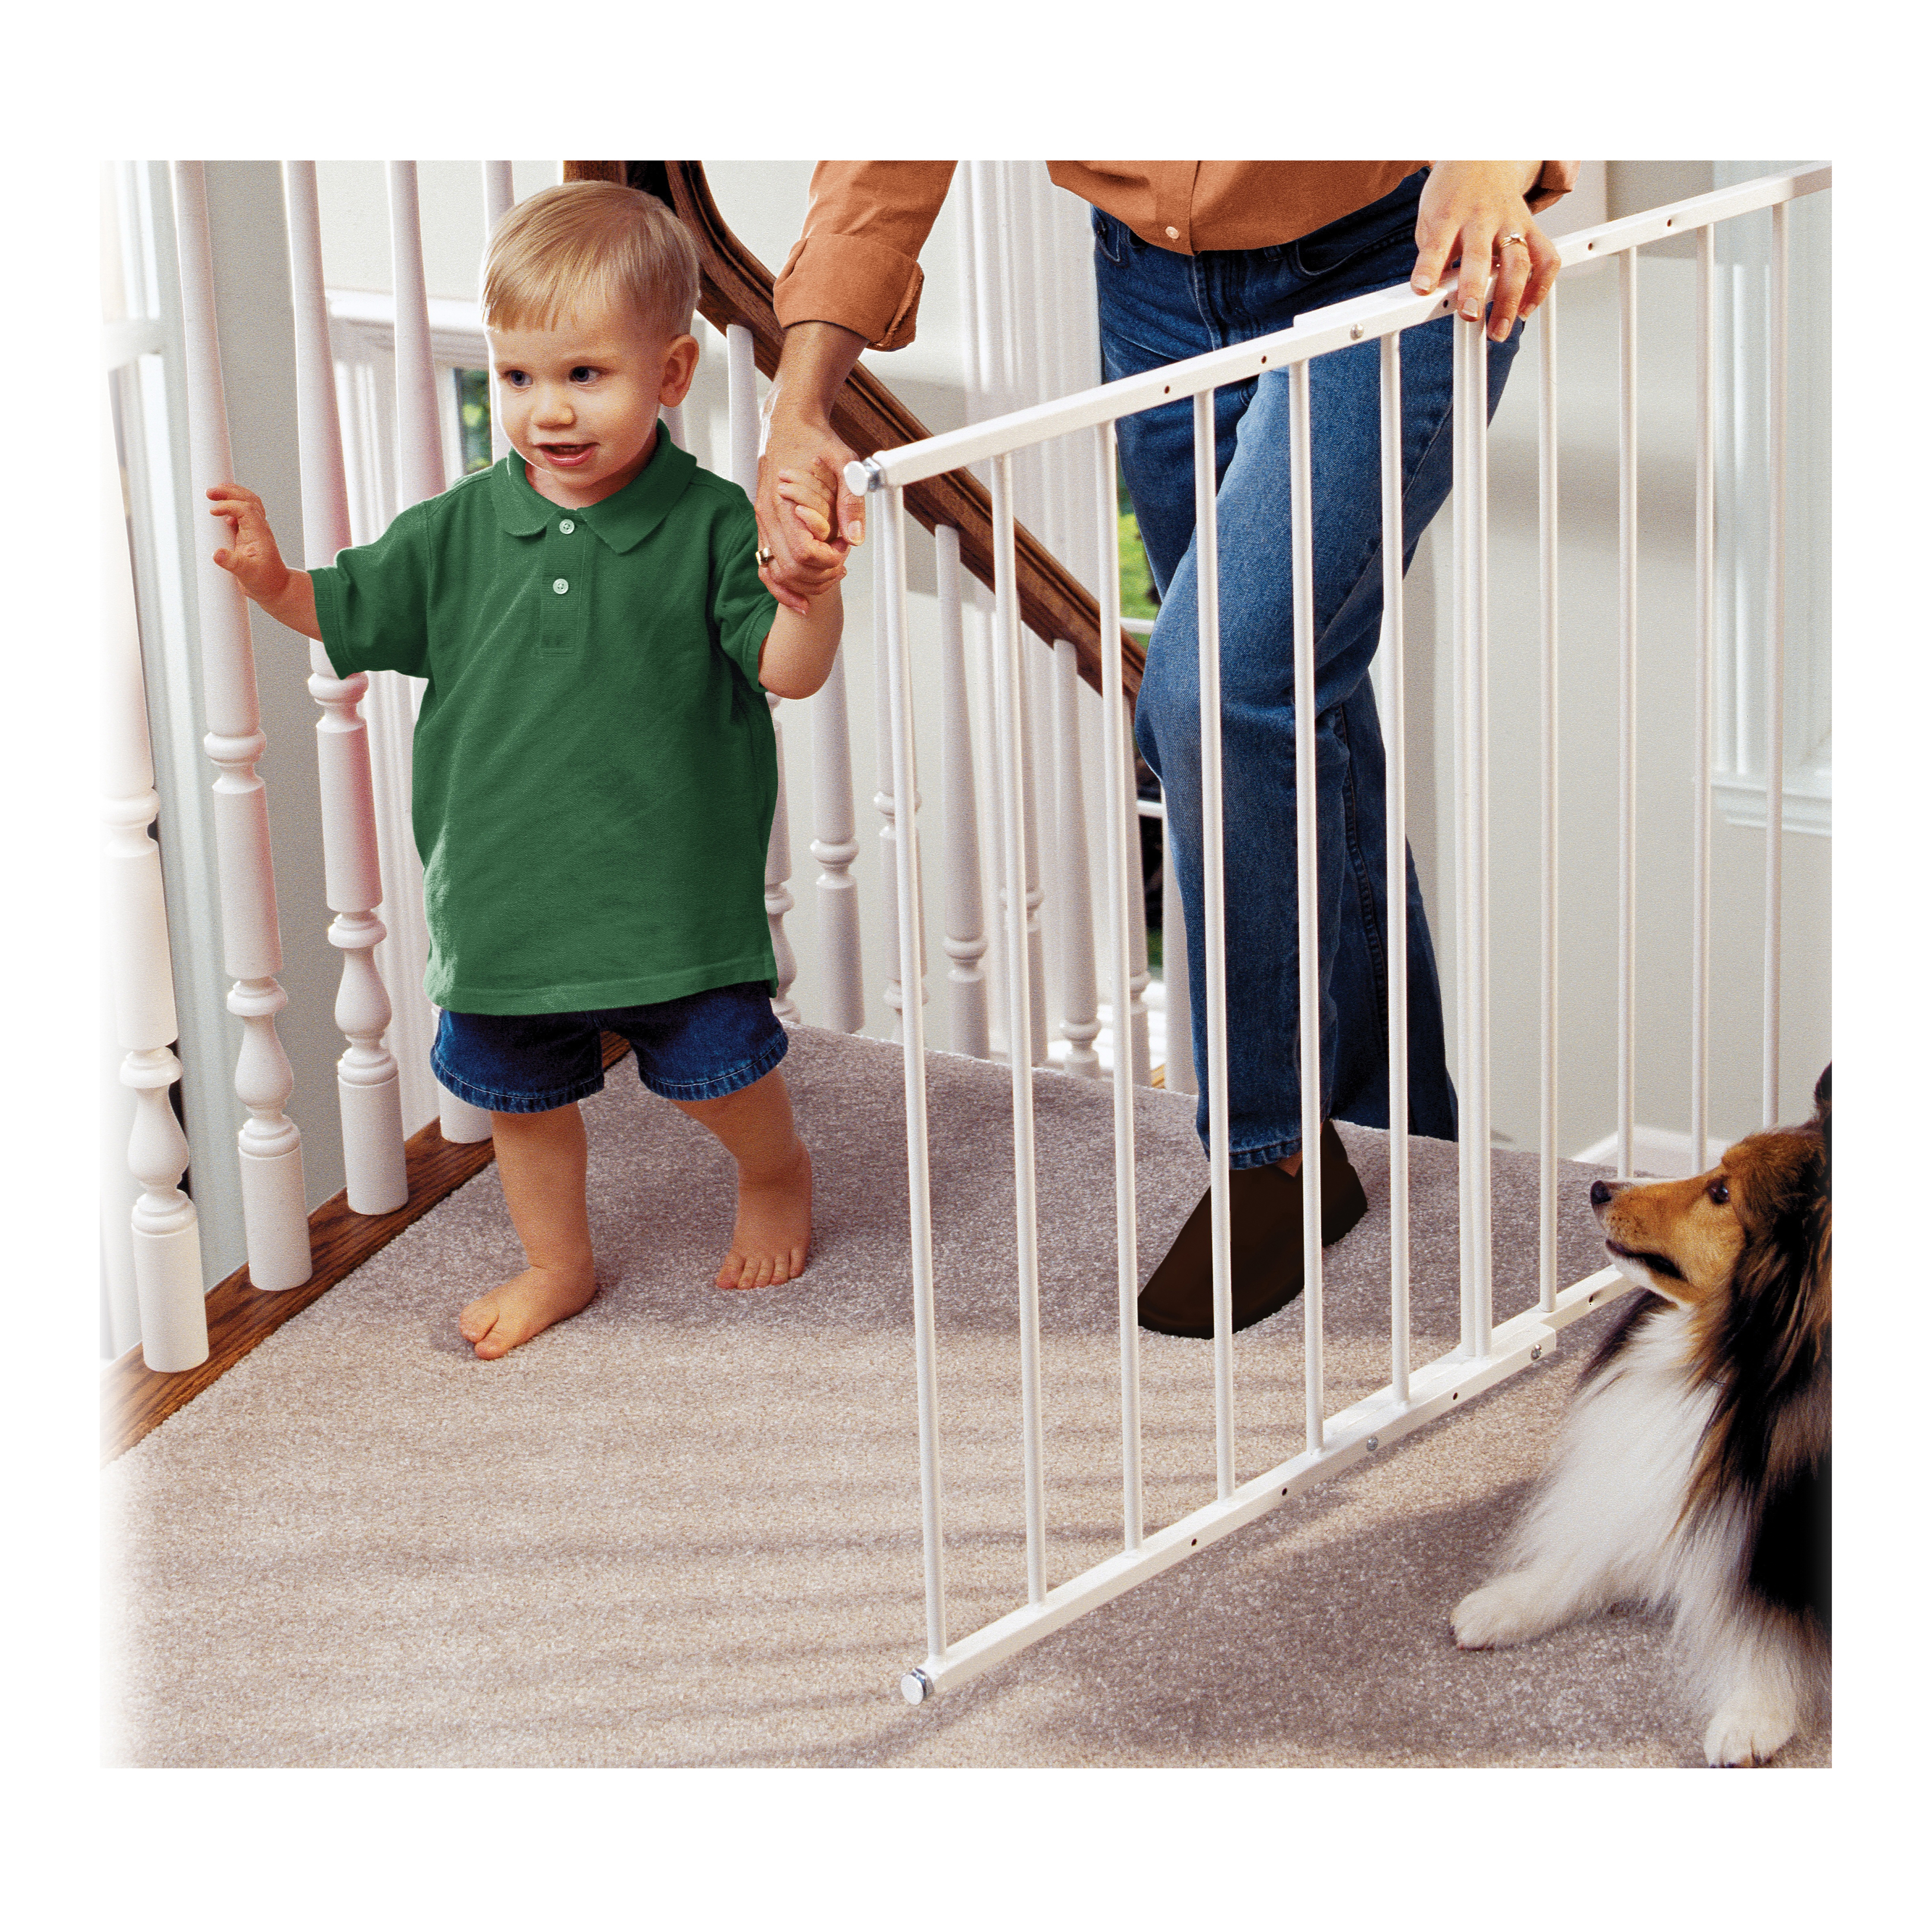 KidCo Safeway G2000 Stair Baby Safety Gate, Steel, White, 33-1/2 in H Dimensions - 5